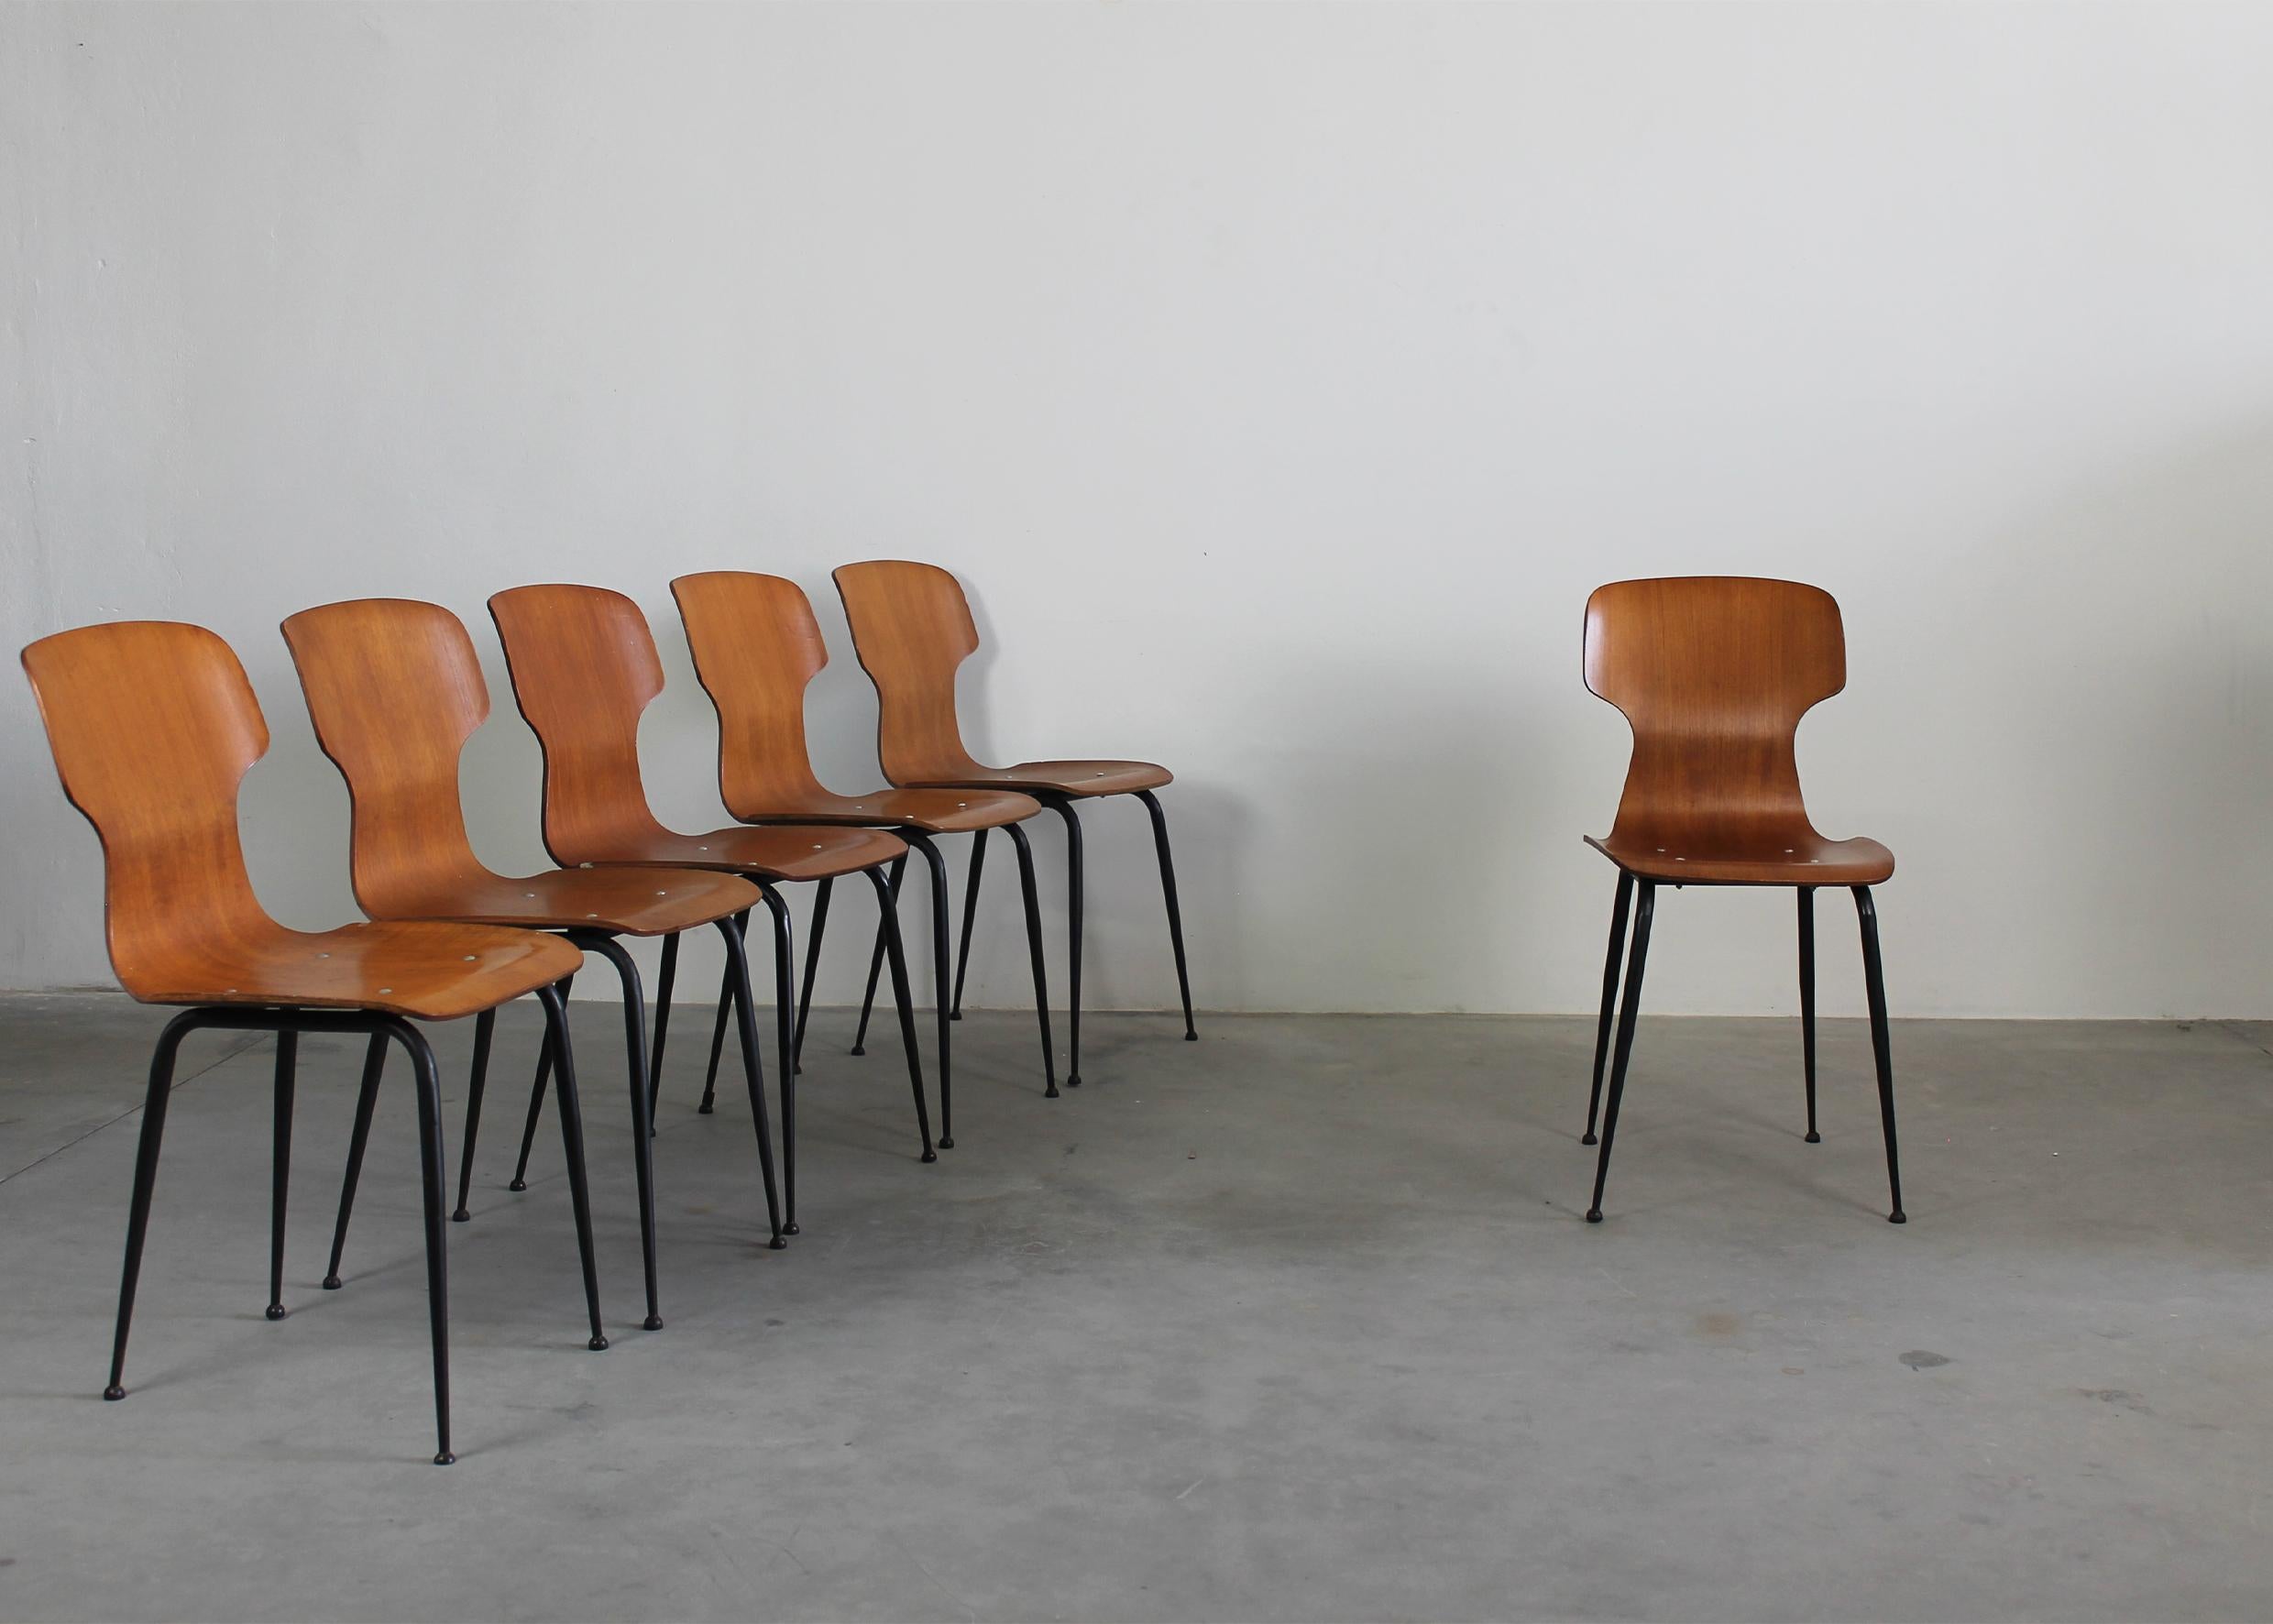 Set of six dining chairs with backs and seats realized in curved veneered plywood and legs in black lacquered metal, designed by Carlo Ratti and manufactured by Industria Legni Curvati (Lissone, Italy) in the 1950s. 

In Italy, at the beginning of